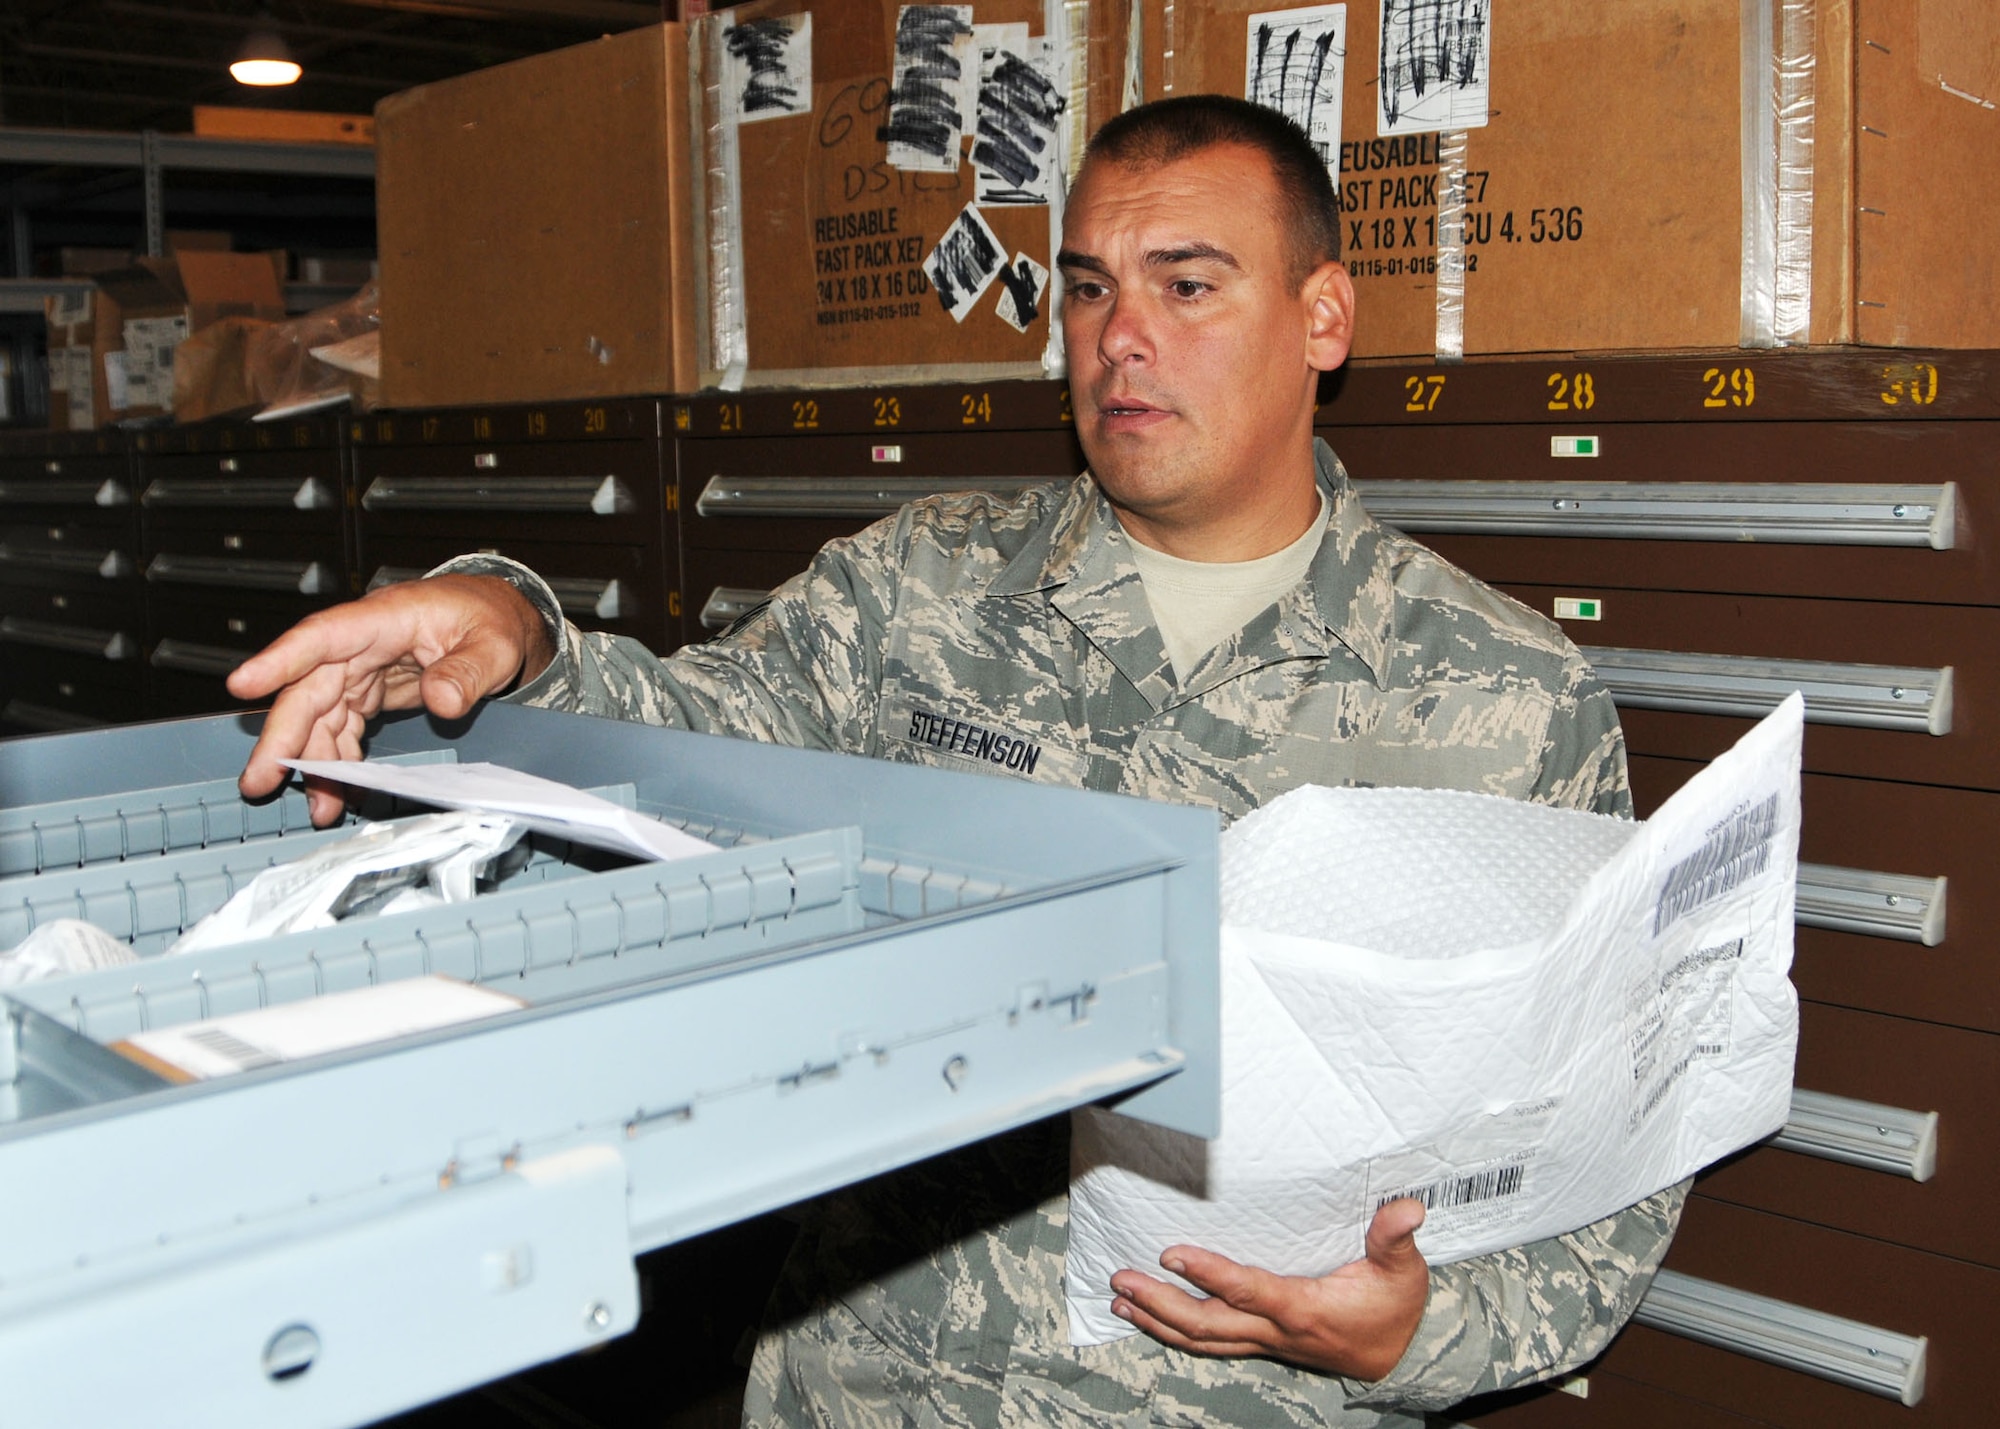 Staff Sgt. James Steffenson, a fuels maintenance specialist with the 120th Fighter Wing in Great Falls, Mont., sorts incoming parts for the 120th Logistics Readiness Squadron. He volunteered to assist the squadron during the wing conversion to the C-130 Hercules air transport mission. National Guard photo/Senior Master Sgt. Eric Peterson.